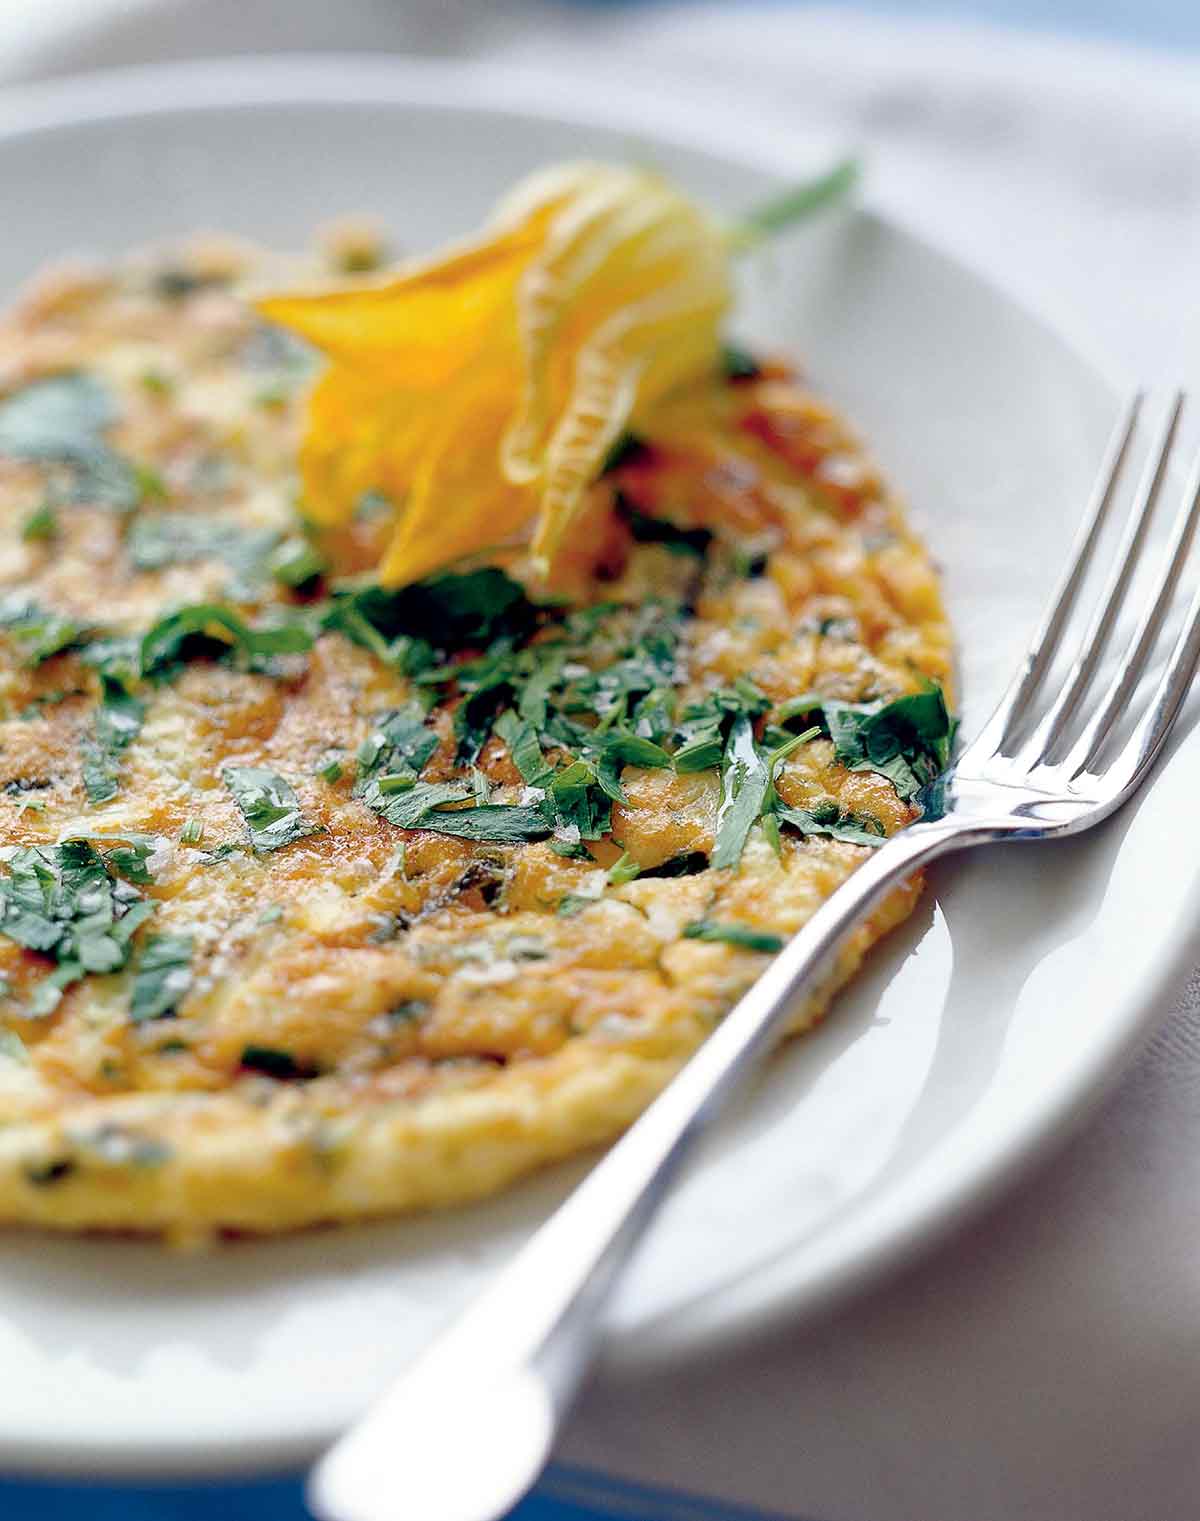 An Italian frittata garnished with a squash blossom on a white plate with a fork resting beside it.